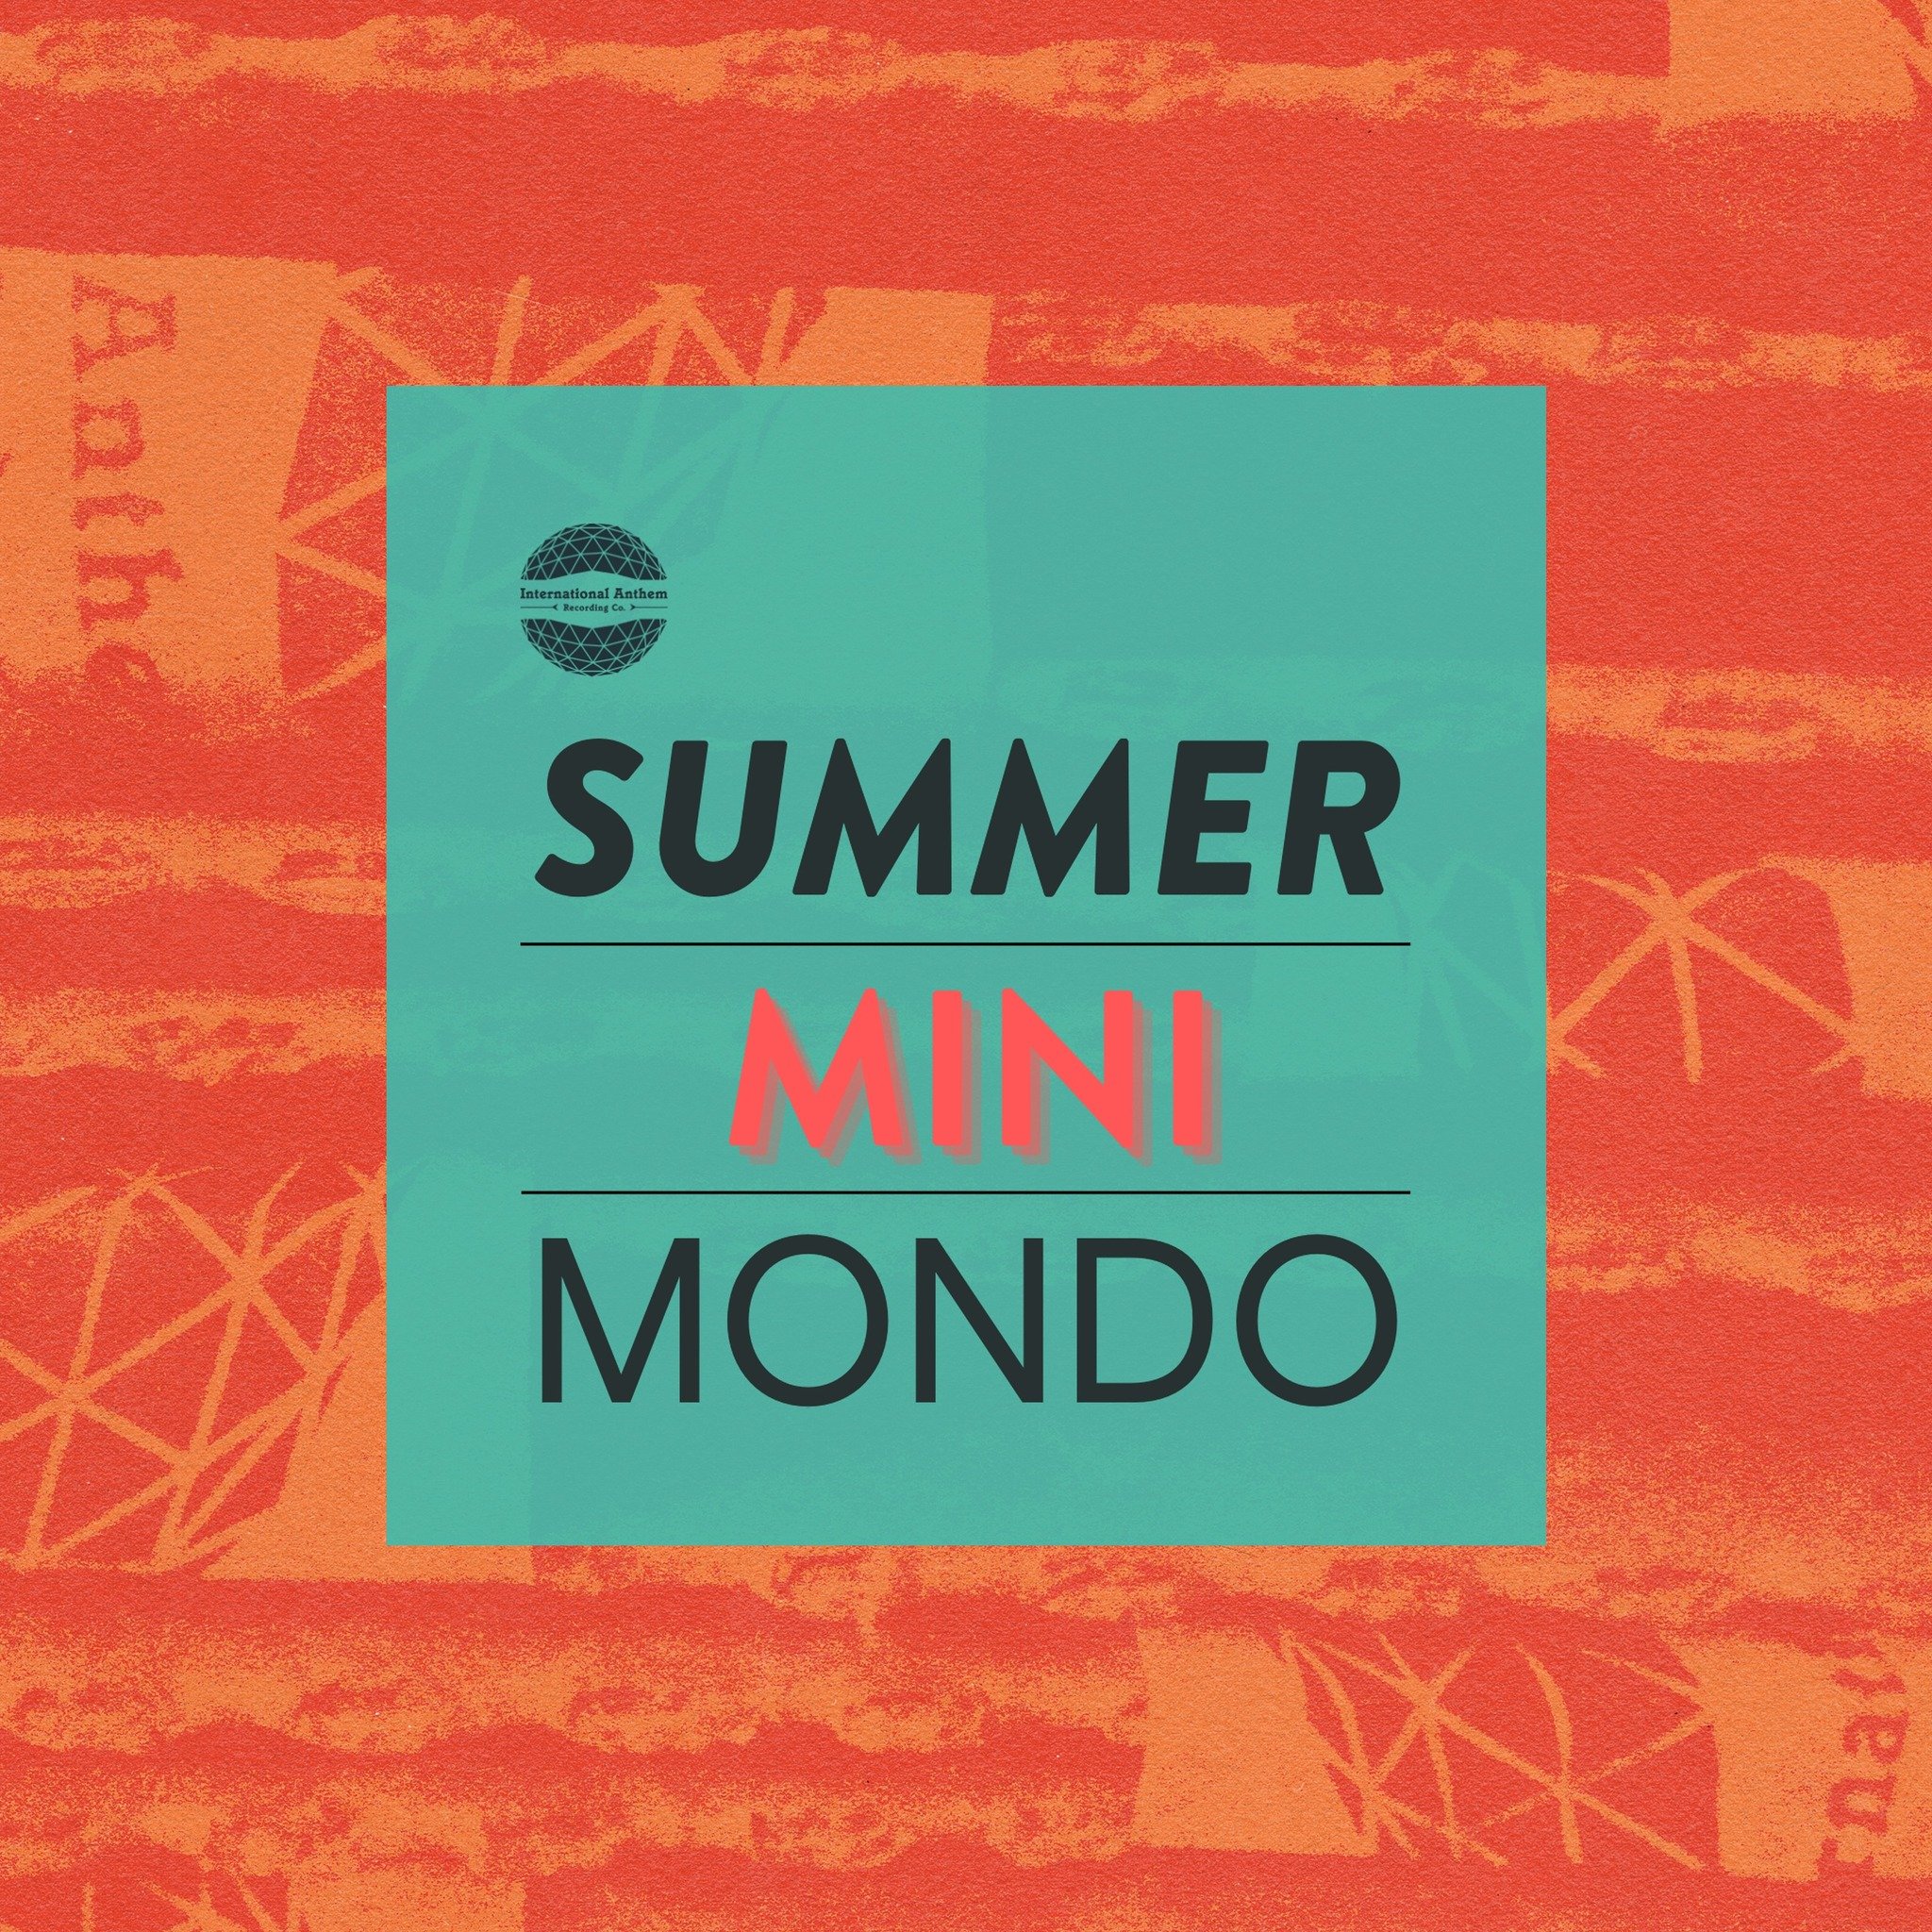 This Wednesday, we will announce the first of our Summer releases. And due to the popularity of our last two MONDO bundles, we&rsquo;ve decided to keep the seasonal bundle series rolling! This new 𝙎𝙐𝙈𝙈𝙀𝙍 𝙈𝙄𝙉𝙄 𝙈𝙊𝙉𝘿𝙊 contains all three o